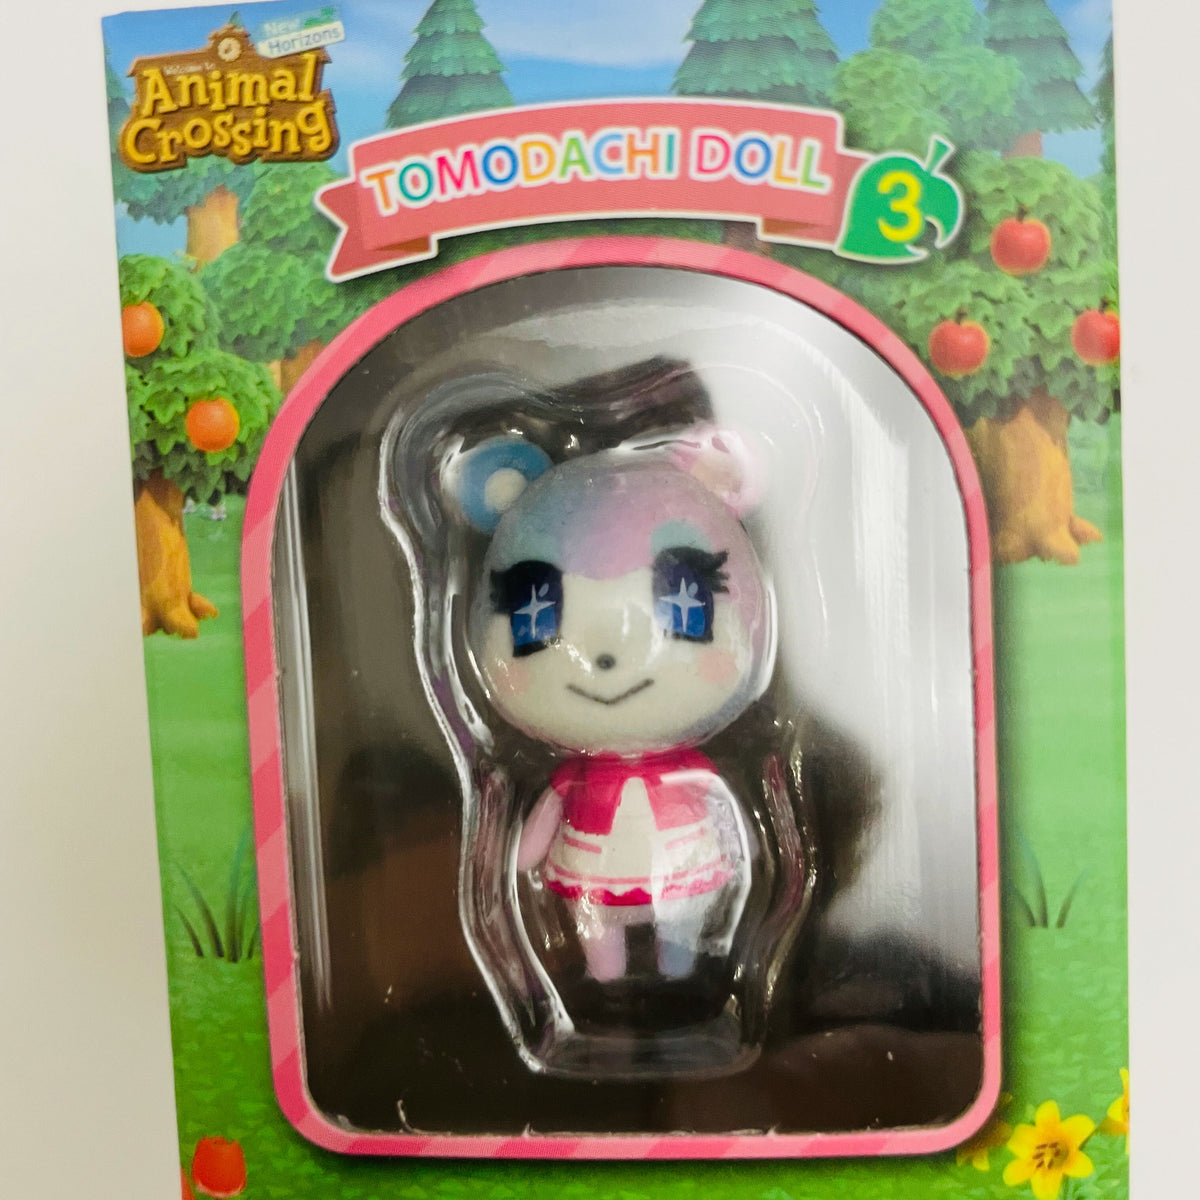 These Animal Crossing: New Horizon Tomodachi Toys Are Cute Collectibles And  On Sale - GameSpot